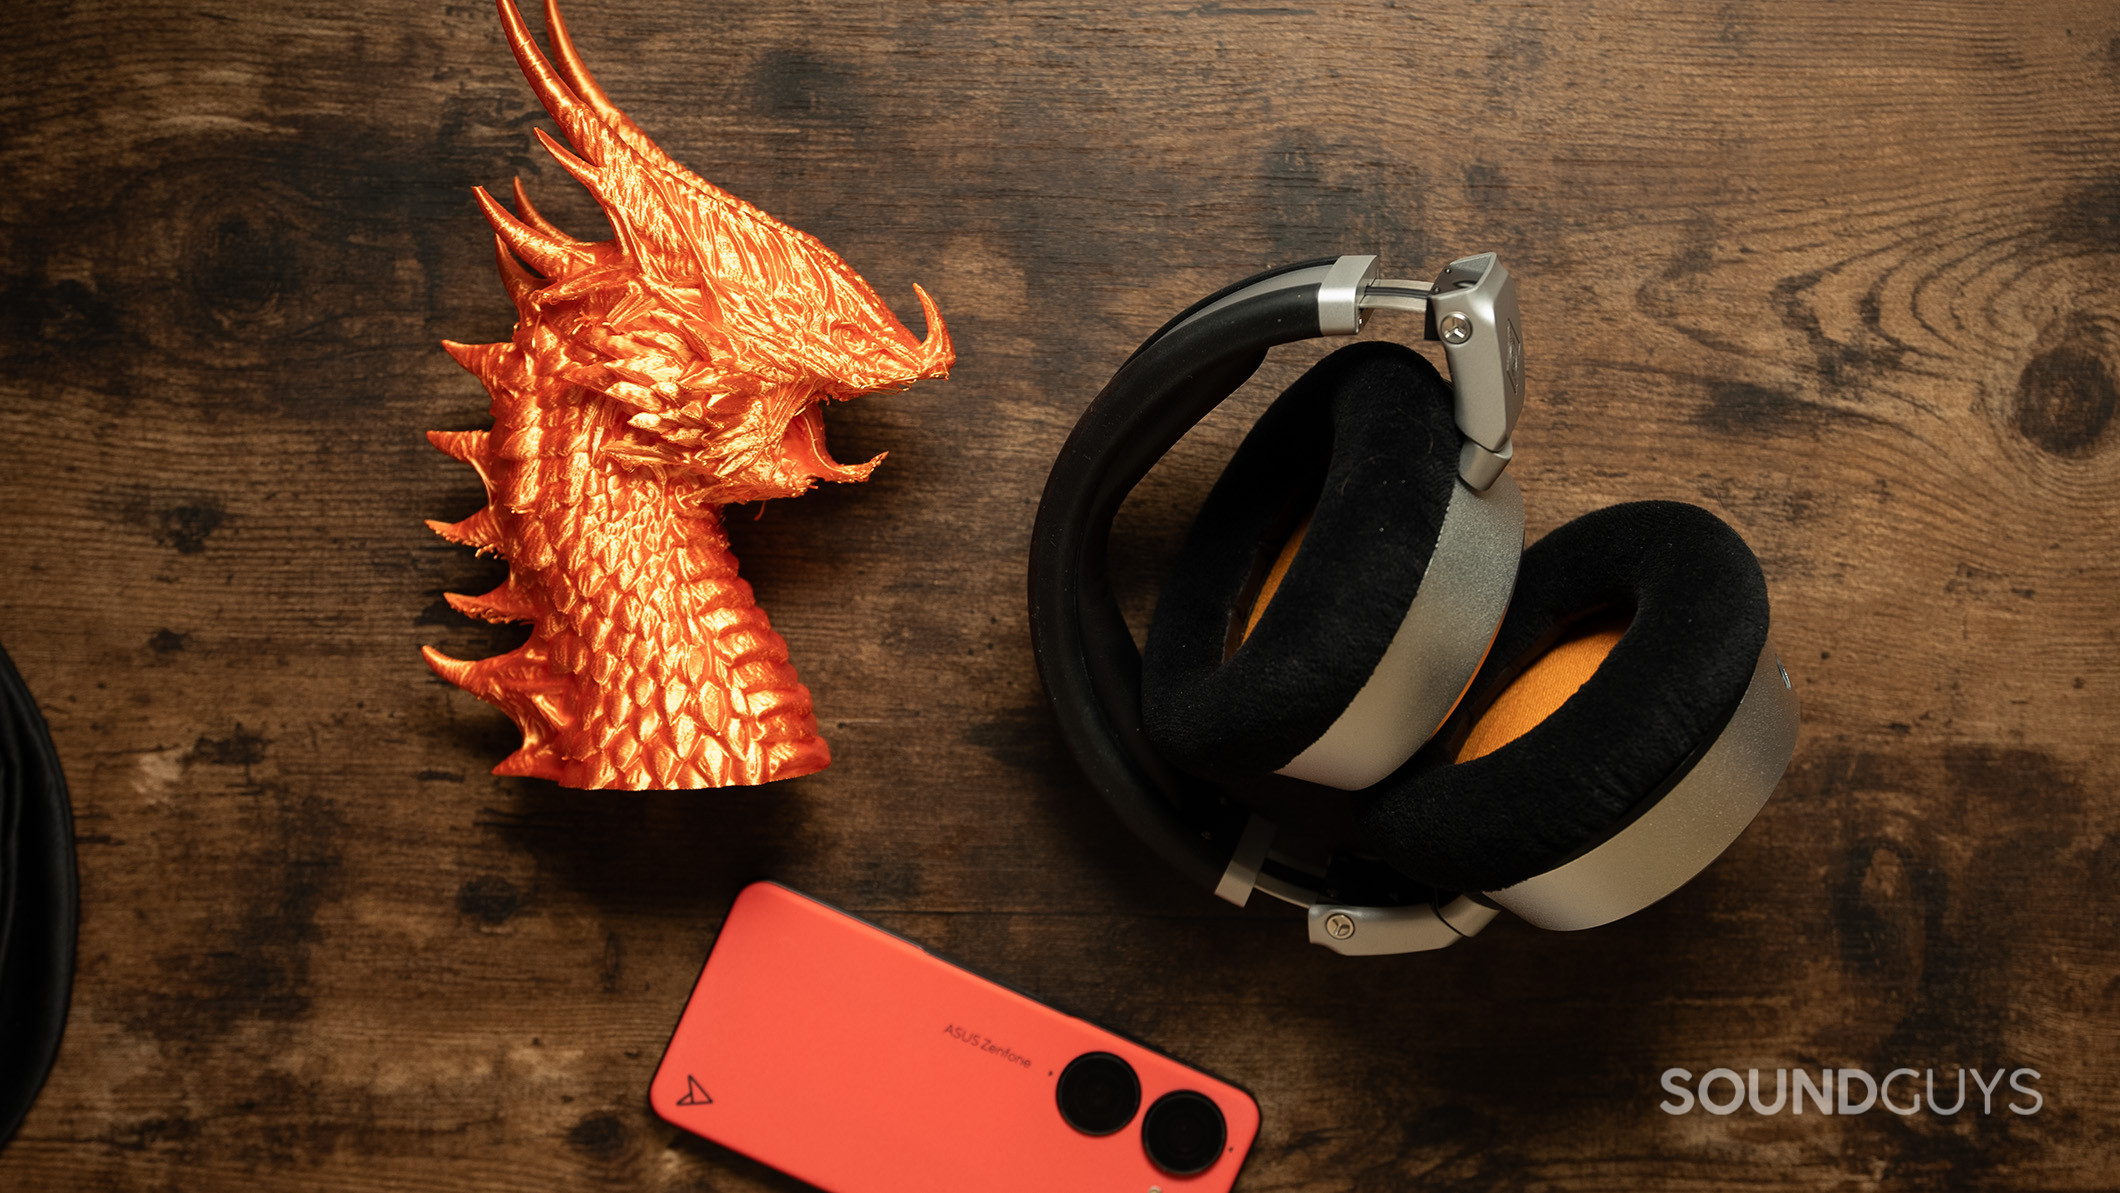 Neumann NDH 30 headphones on a desk next to a plastic dragon and smartphone. 